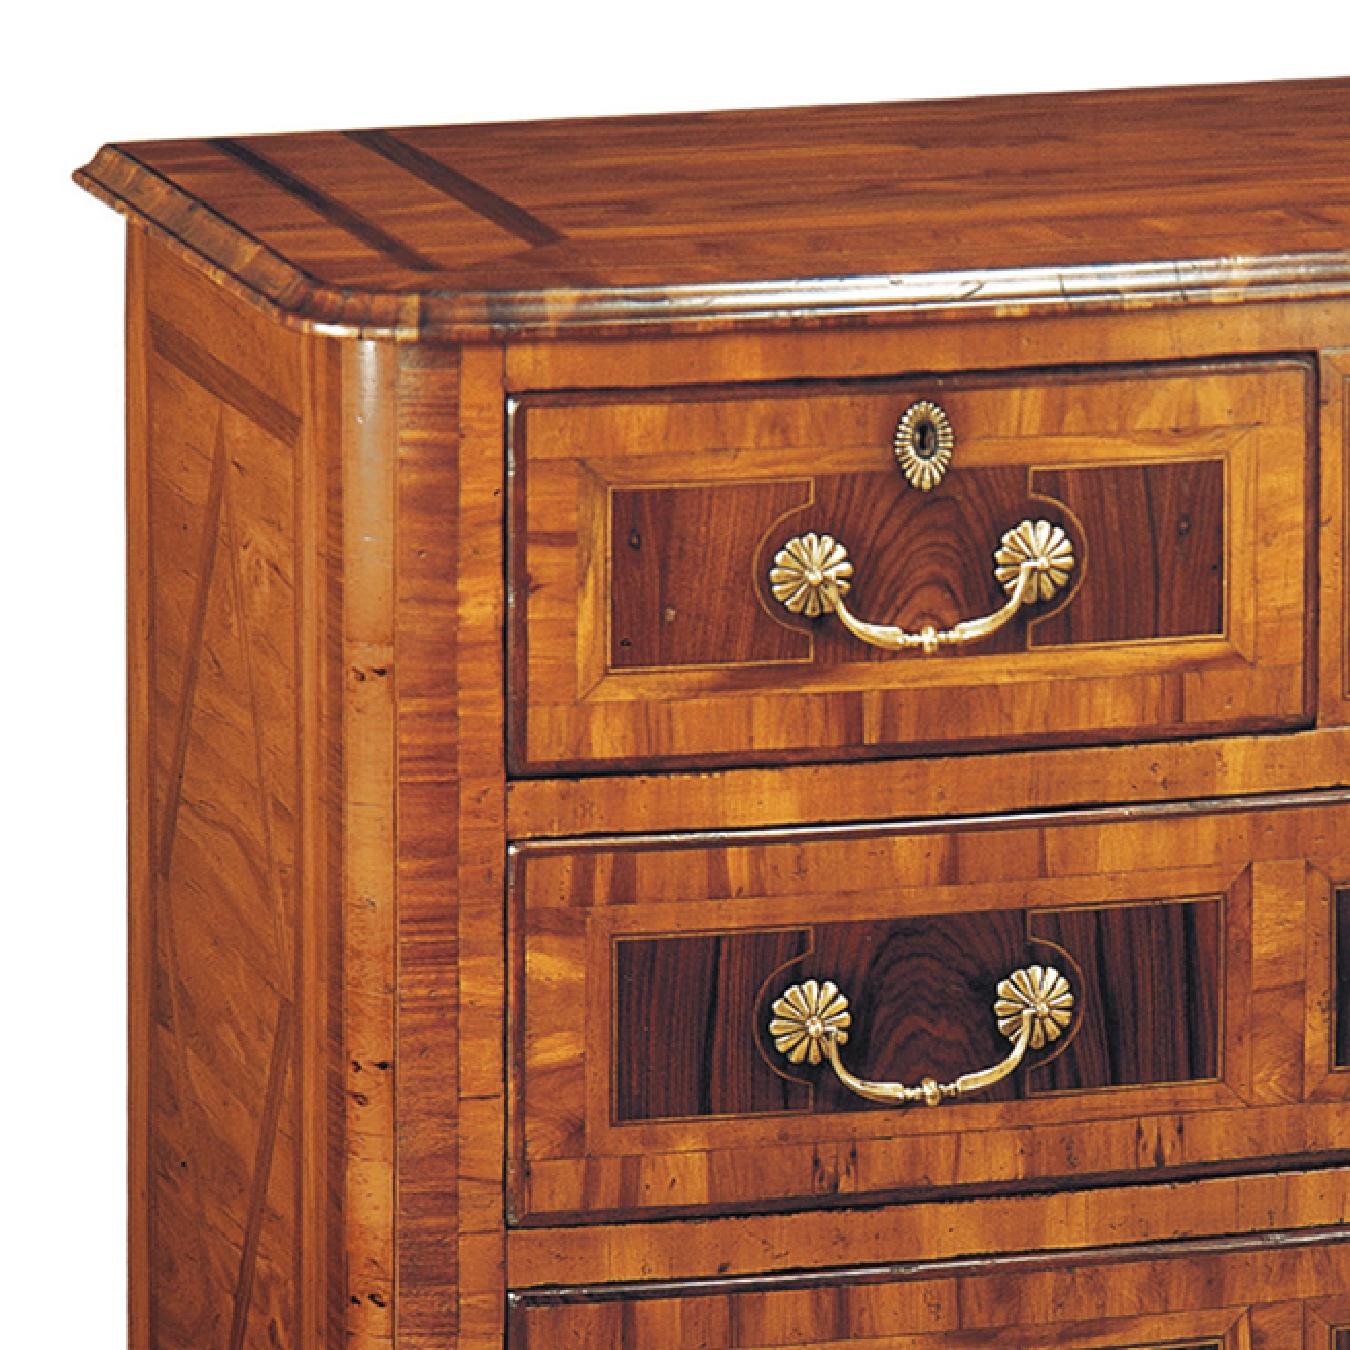 In the French Regency style, this XVIIIth Century Chest has a beautiful intricate marquetry work and is veneered in four types of wood: Yew, Rosewood, white cedar and granadillo. This detailing runs through the drawers, doors and sides of the piece,